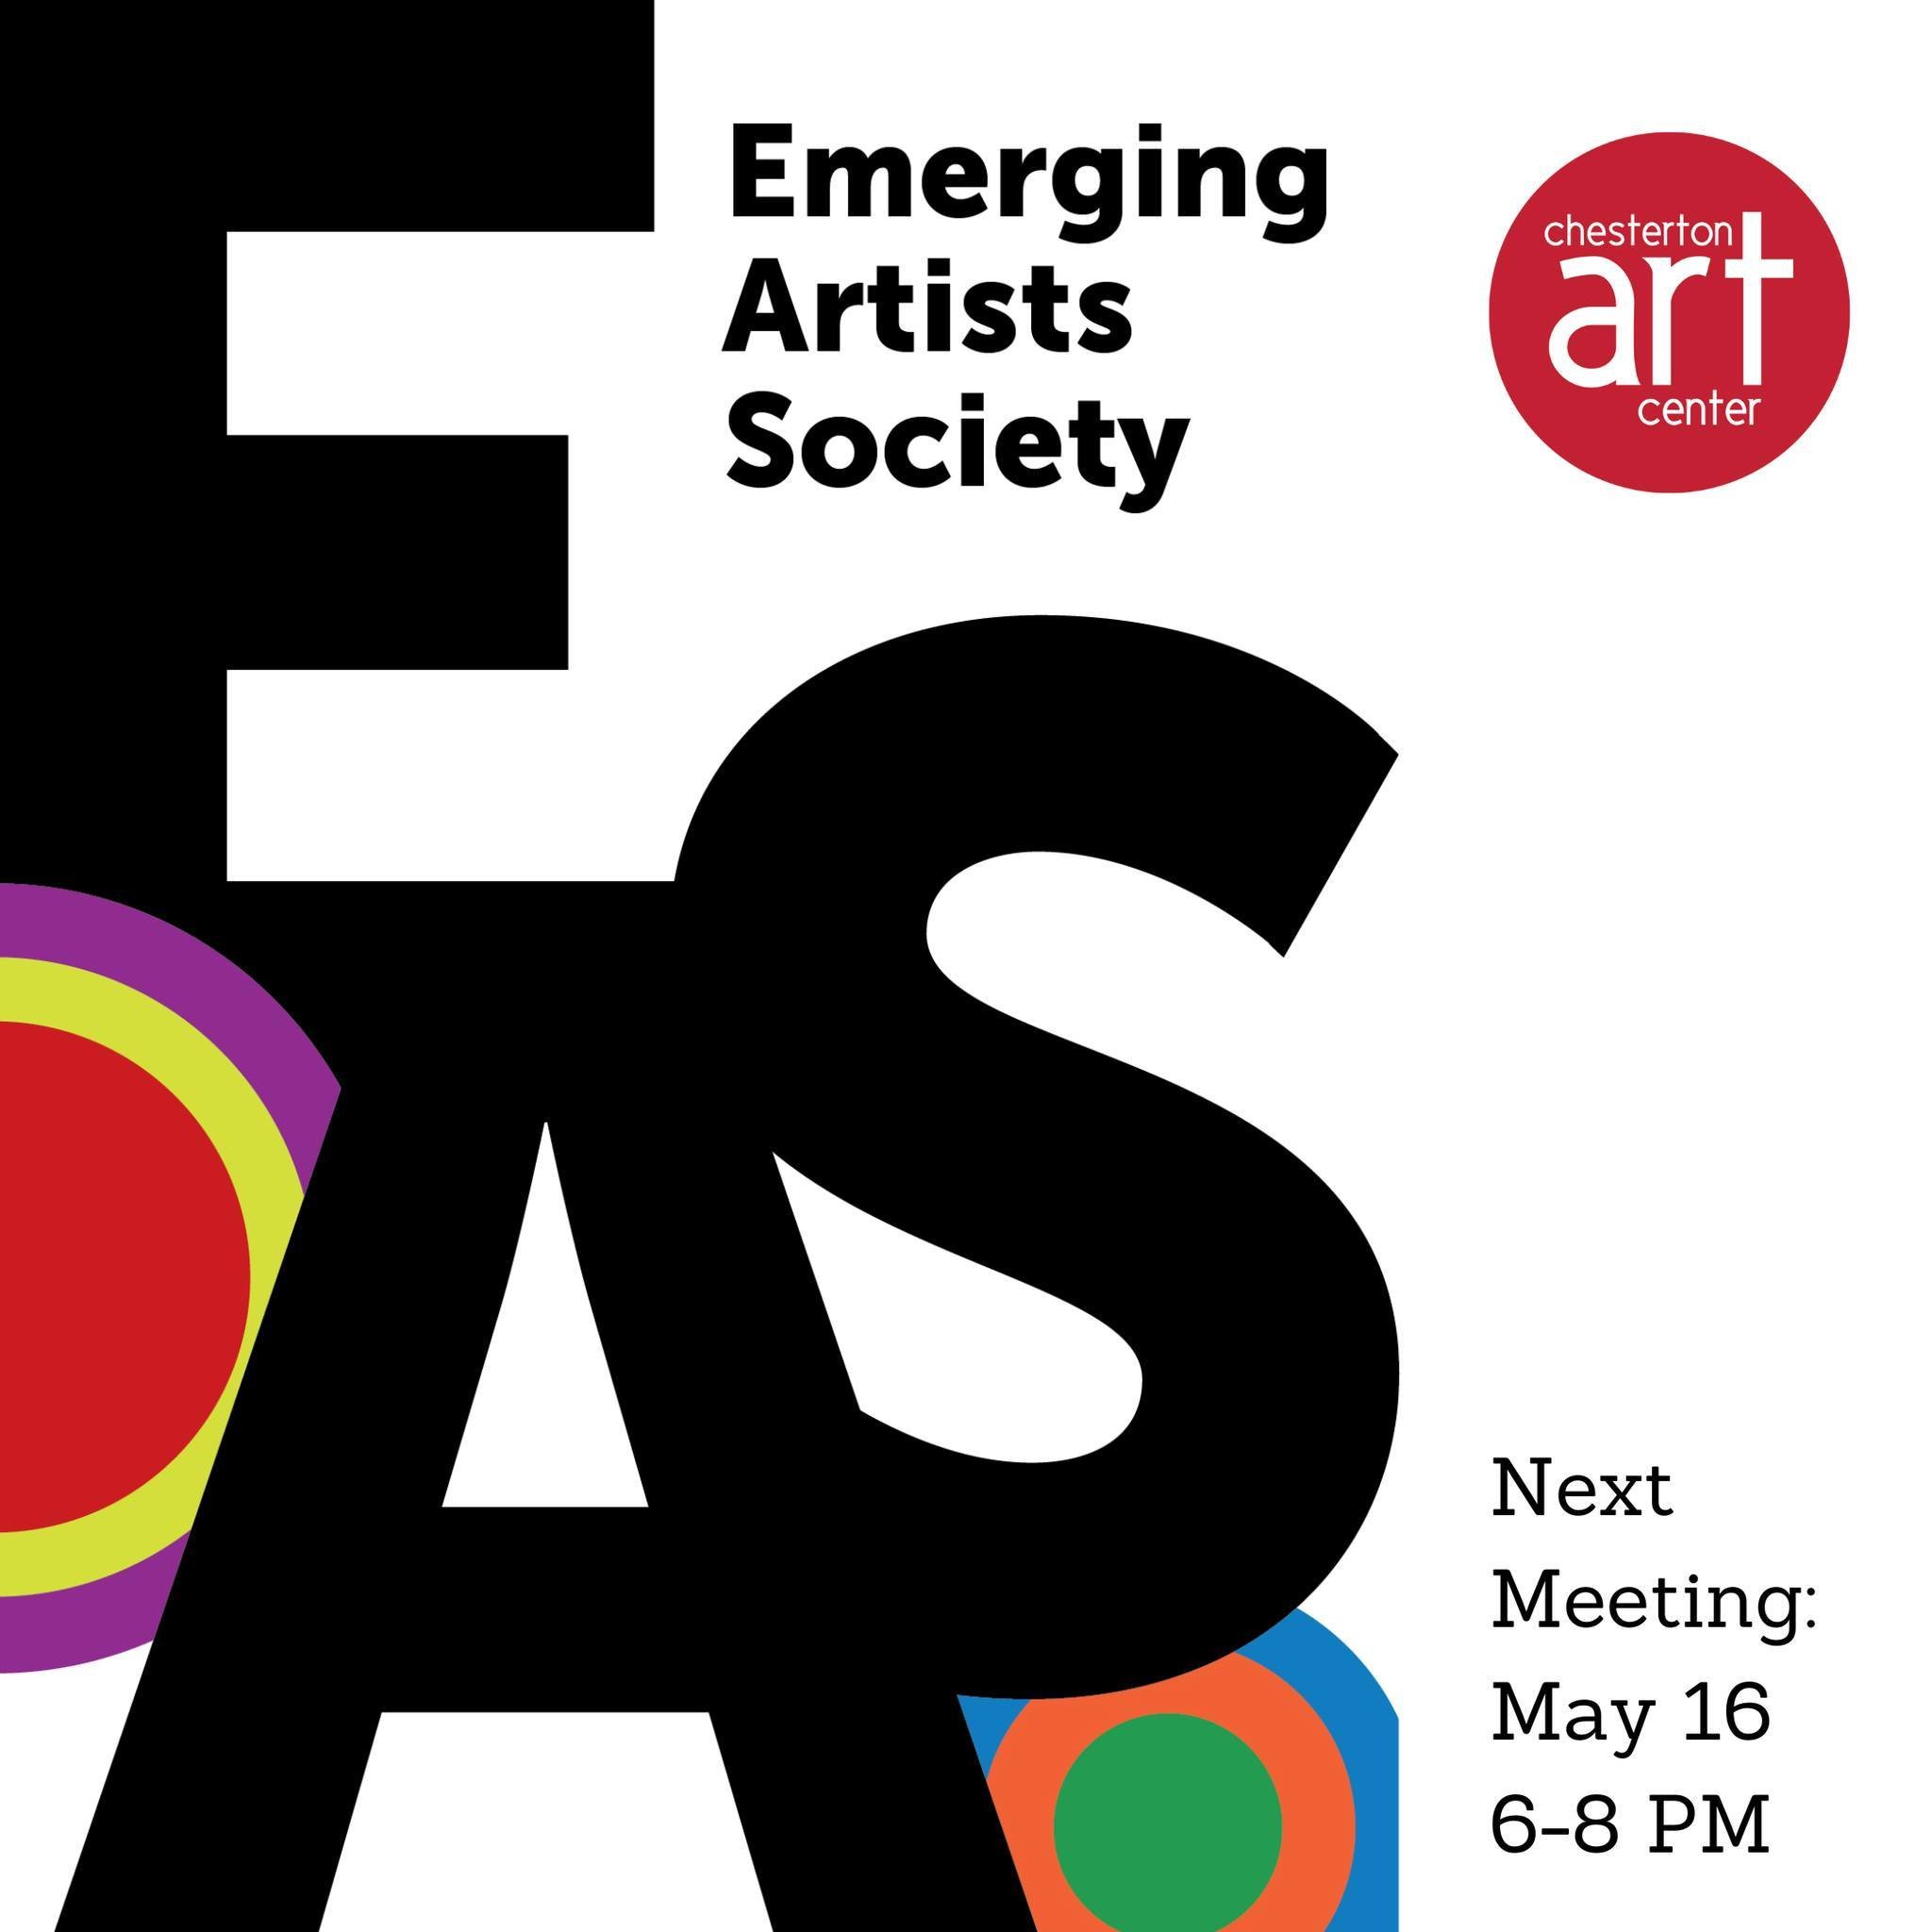 Reminder! The next EAS meeting is Thursday, May 16 from 6-8 PM at CAC.

At this meeting, artists will partake in 2 separate activities, starting with an open forum discussion about upcoming shows/opportunities, discussing what being a &quot;professio